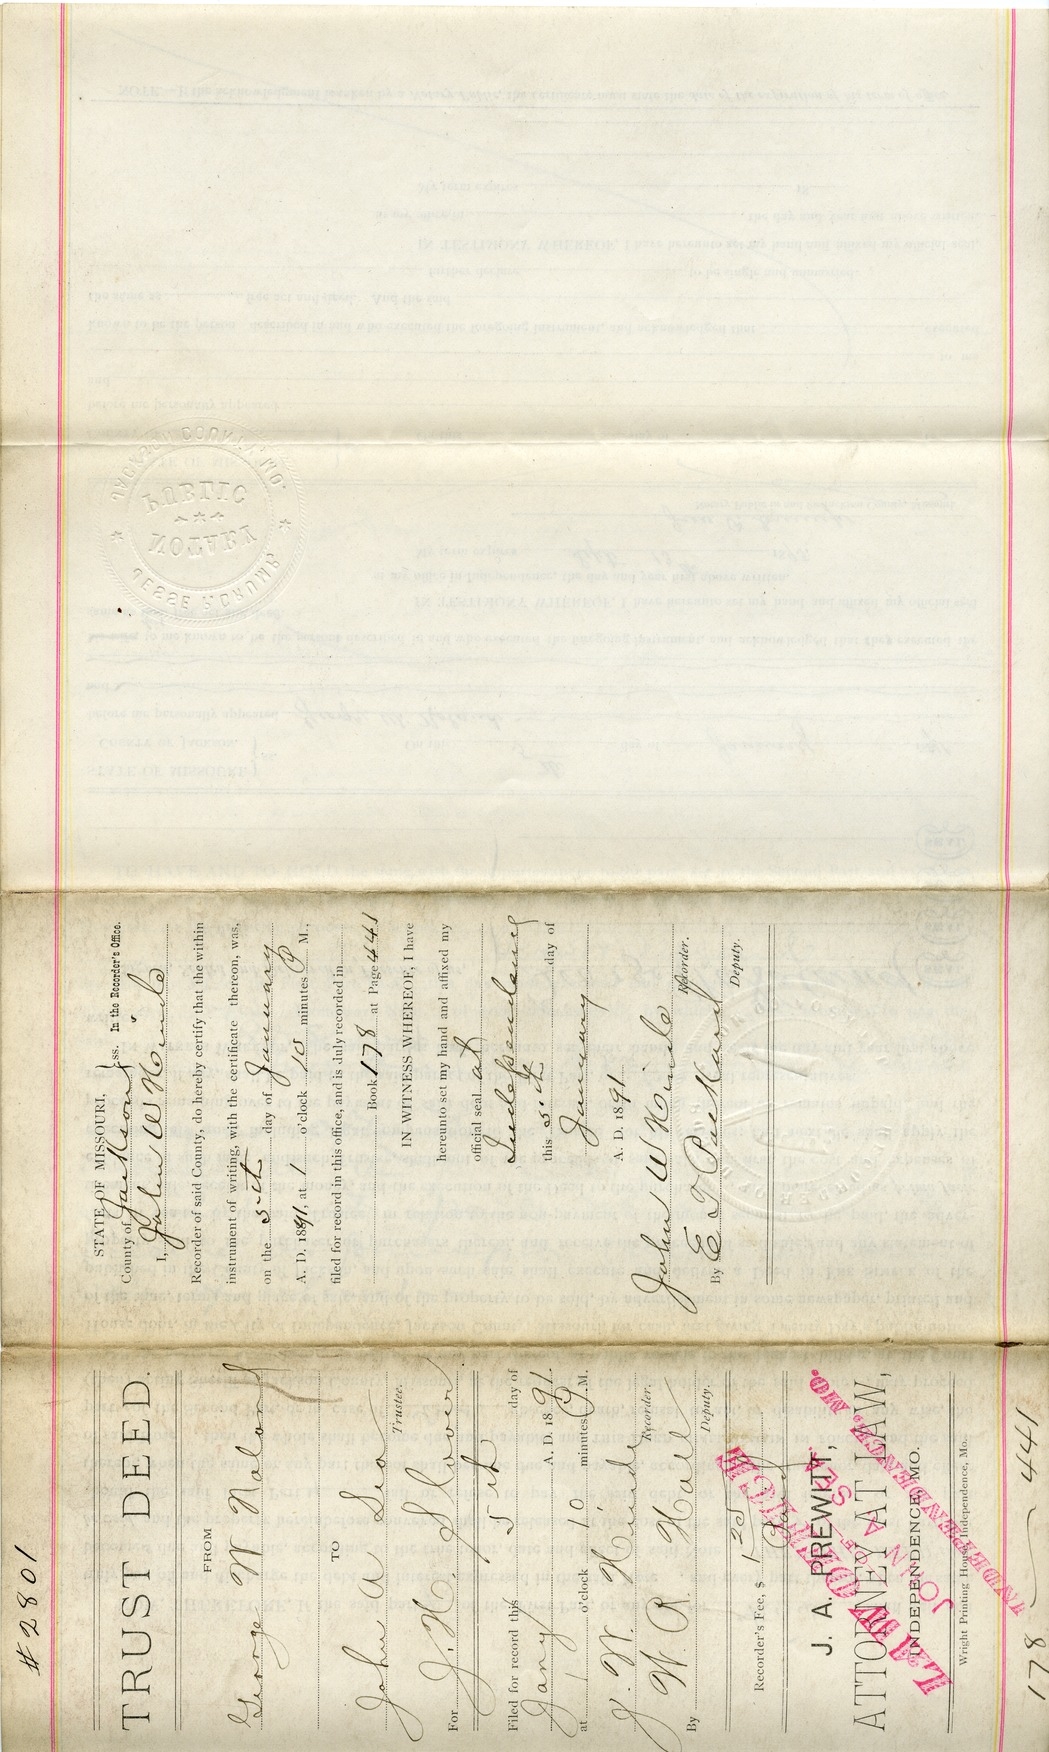 Trust Deed from George W. Noland to John A. Sea for J. H. Slover